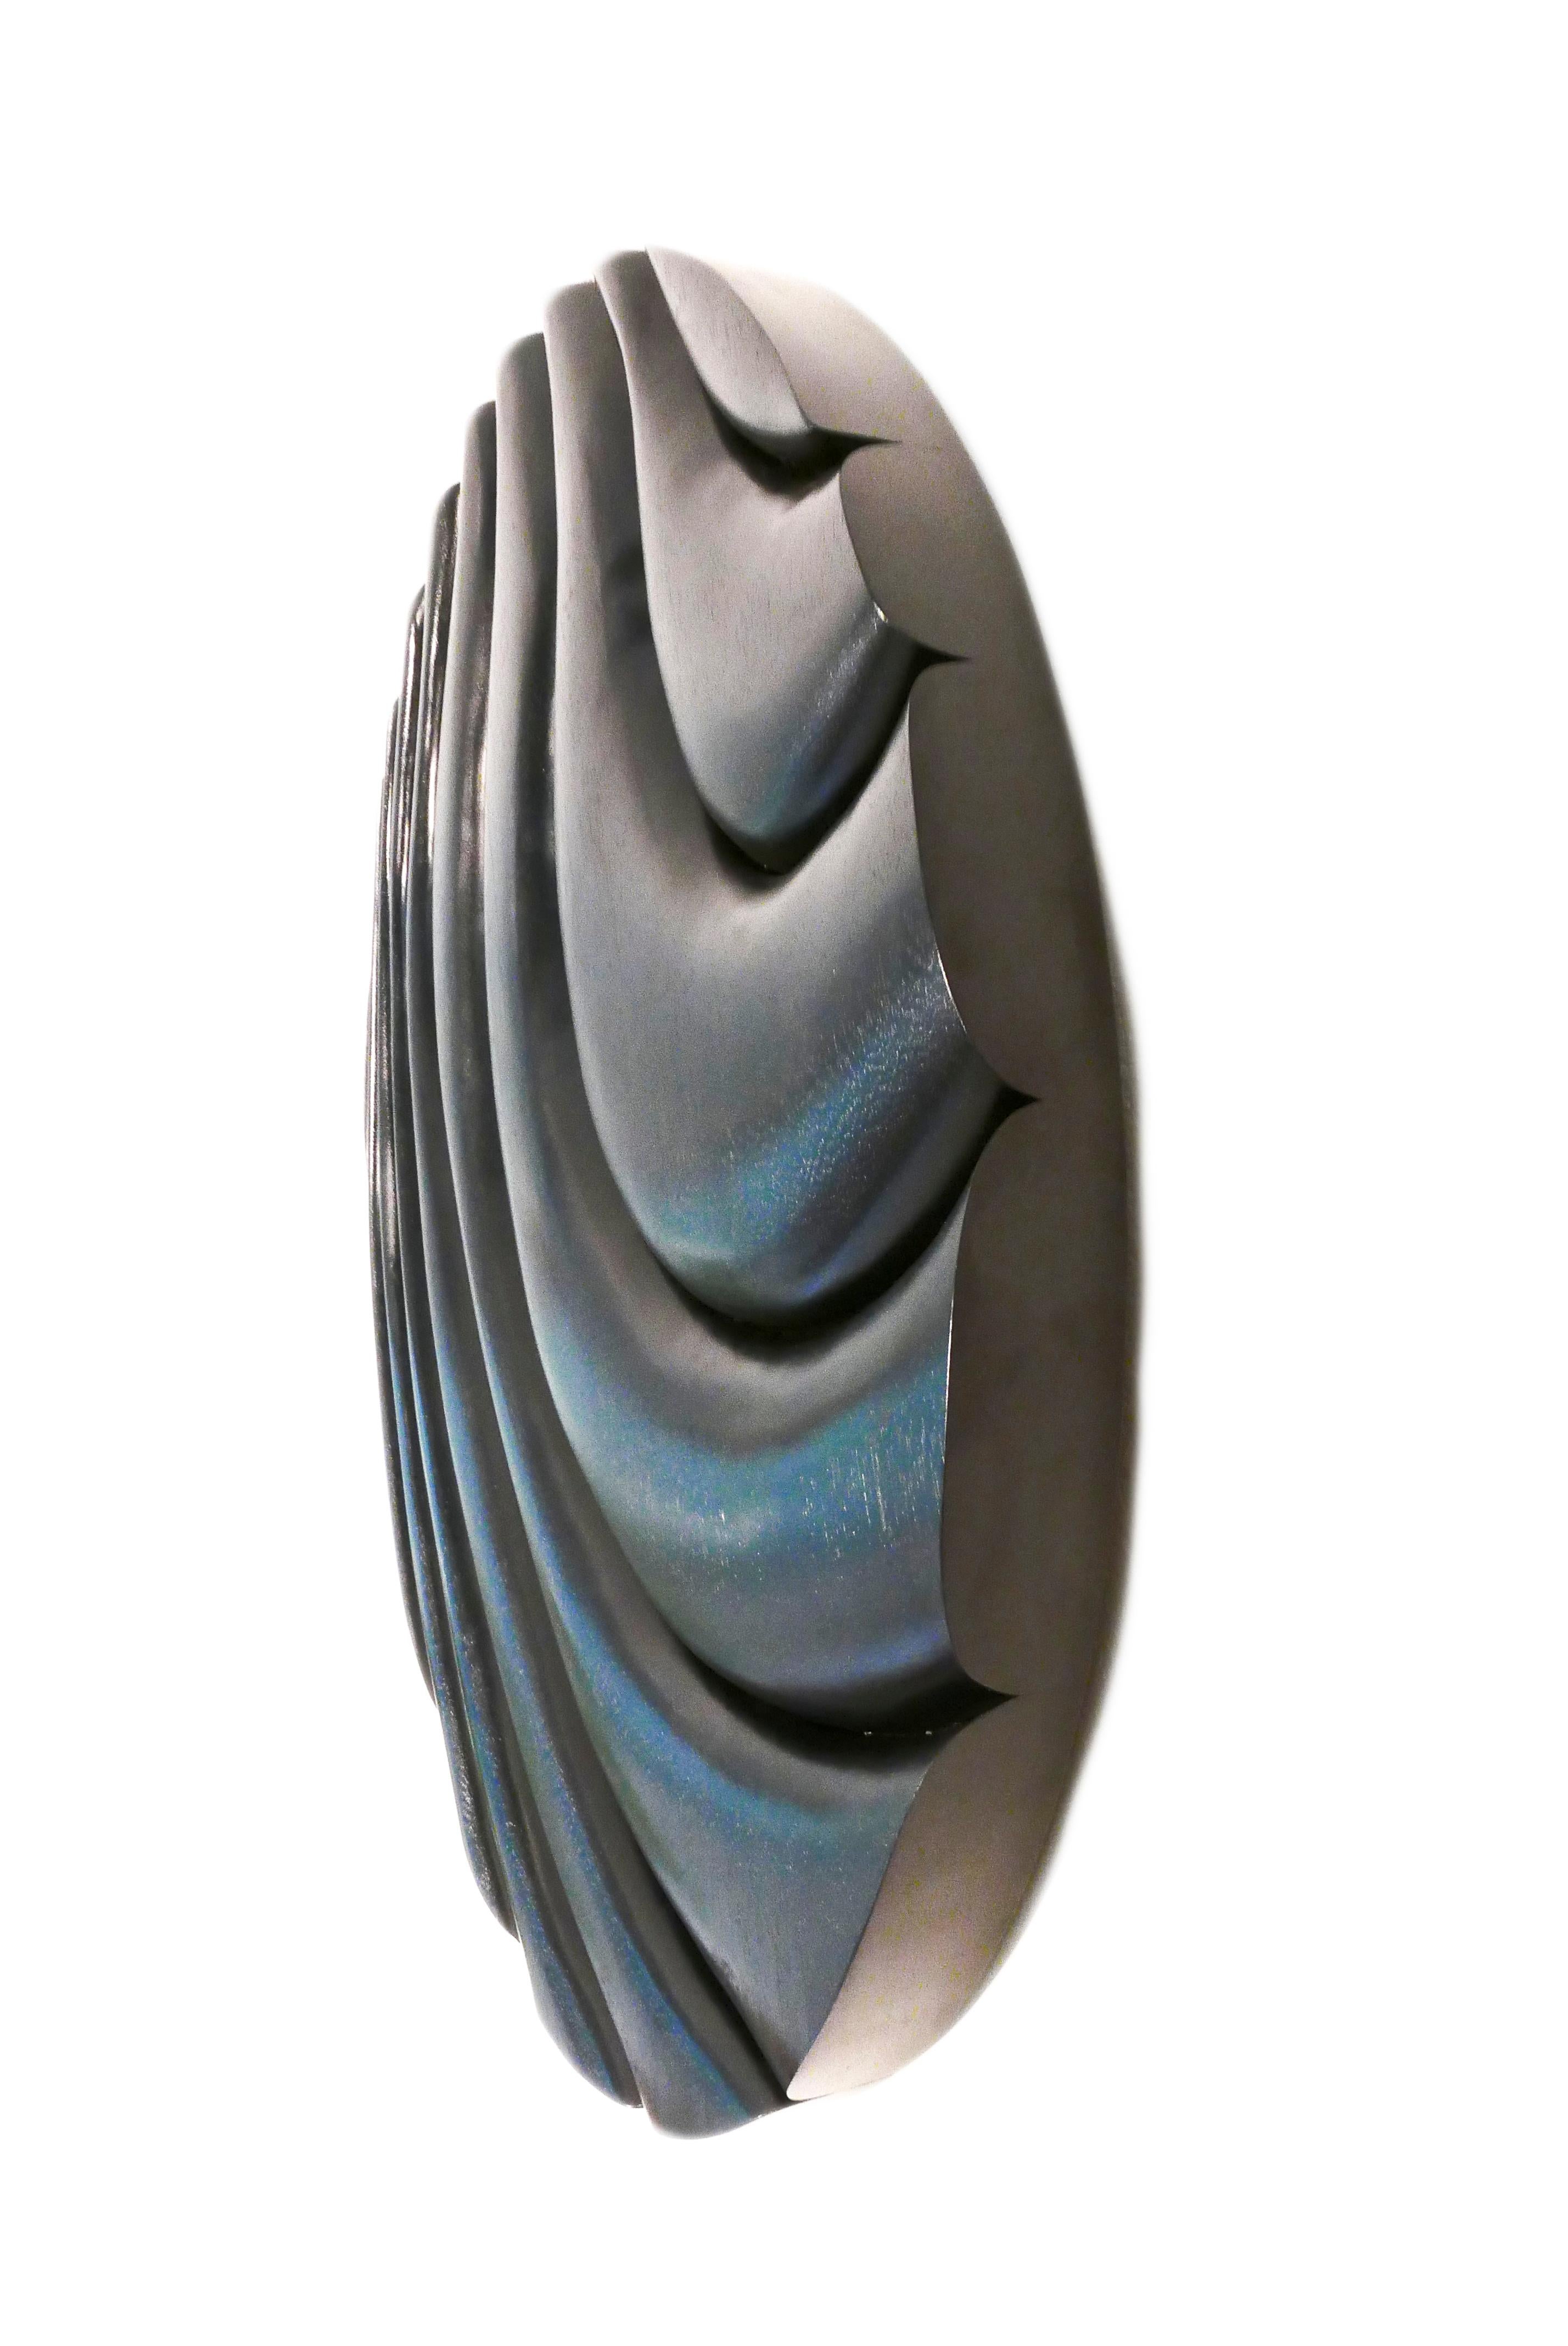 Mid-Century Modern Contemporary Wall Mounted Sculpture from 'Delta' Series by James Rowland